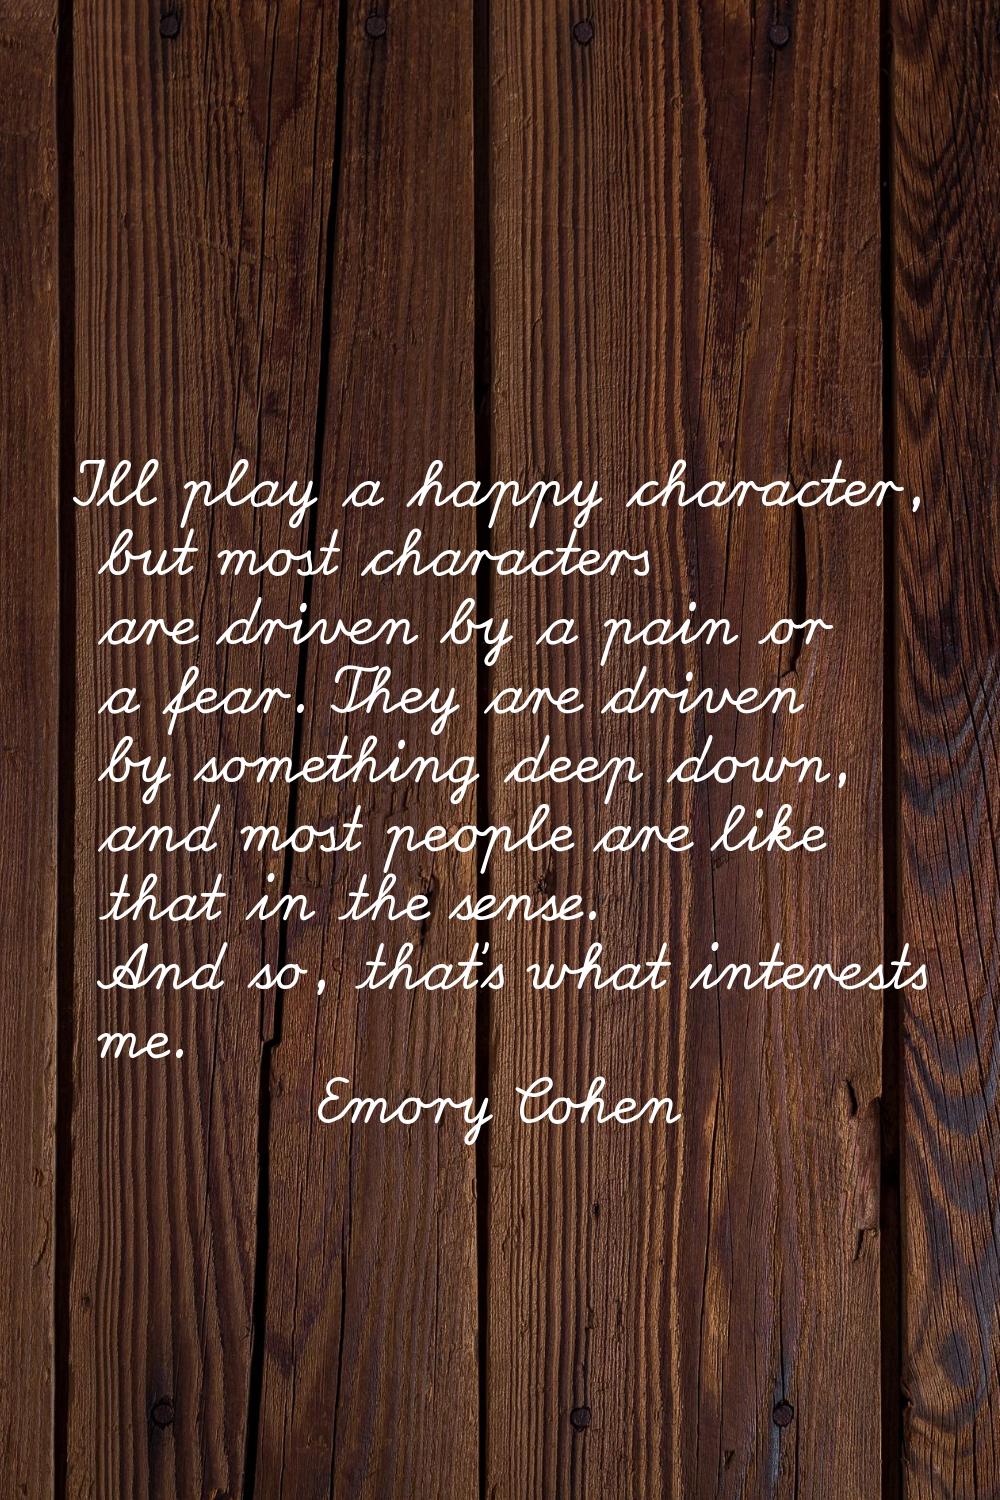 I'll play a happy character, but most characters are driven by a pain or a fear. They are driven by